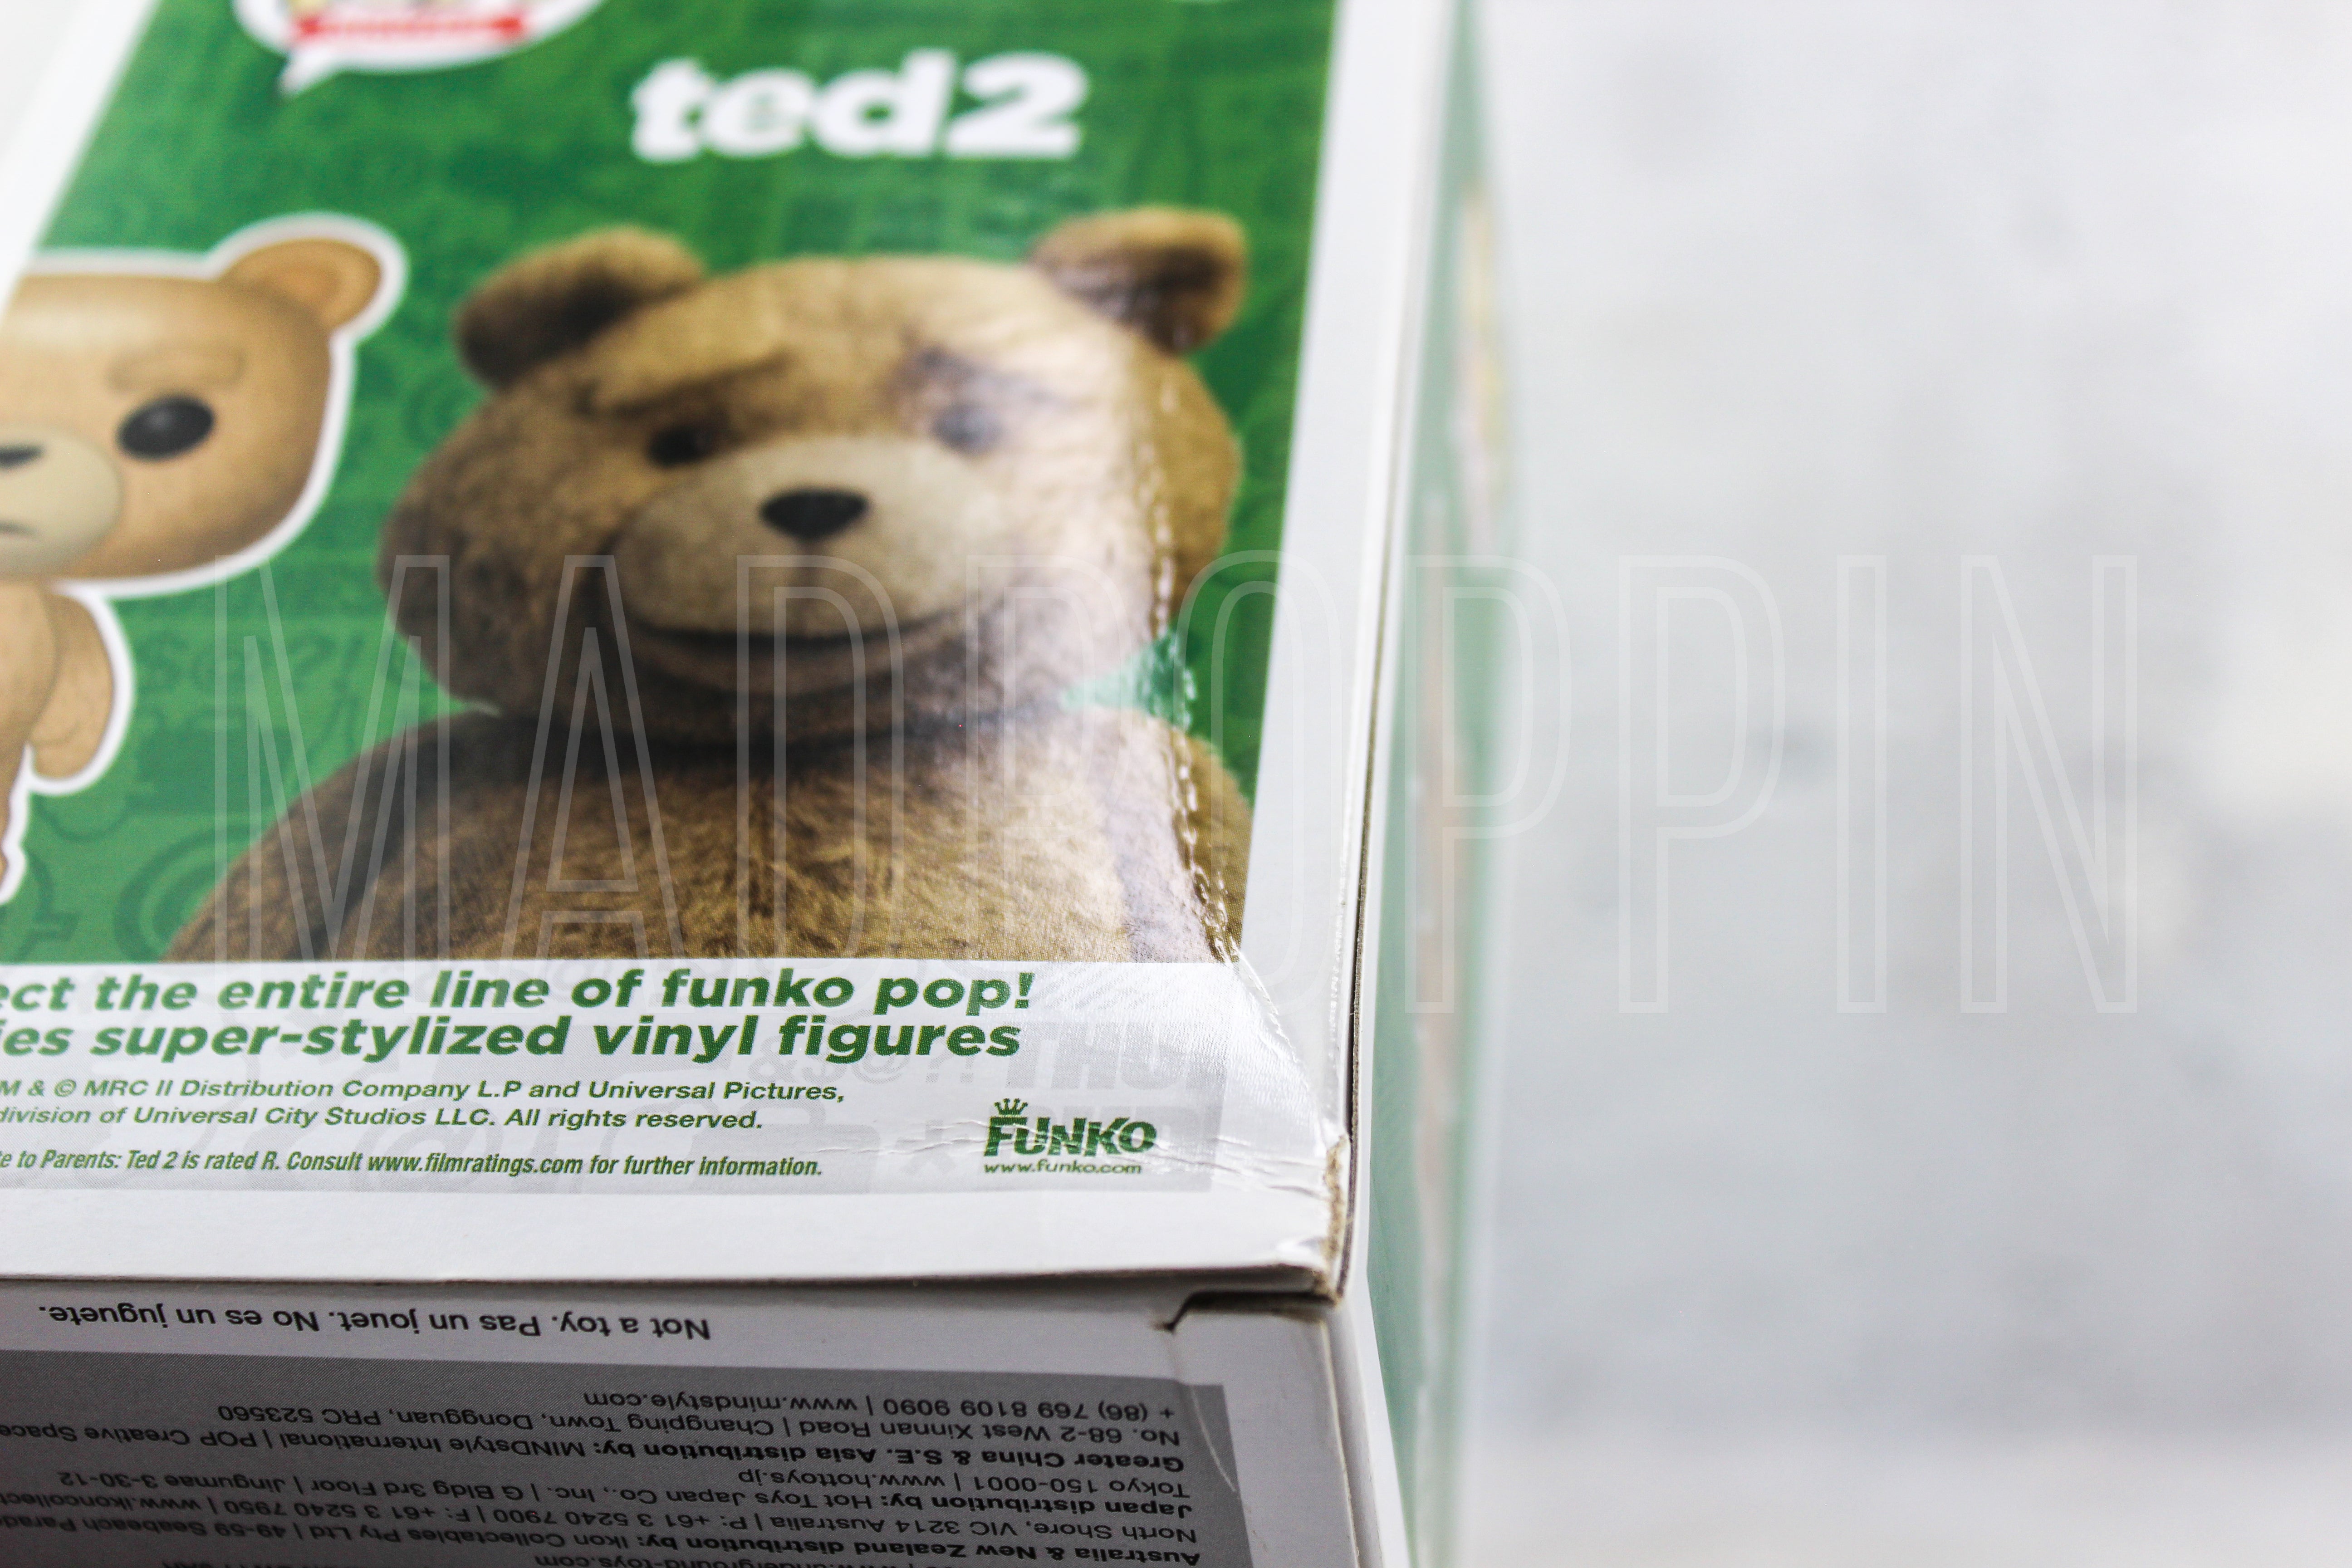 POP! Movies: Ted 2 - Ted (Flocked)